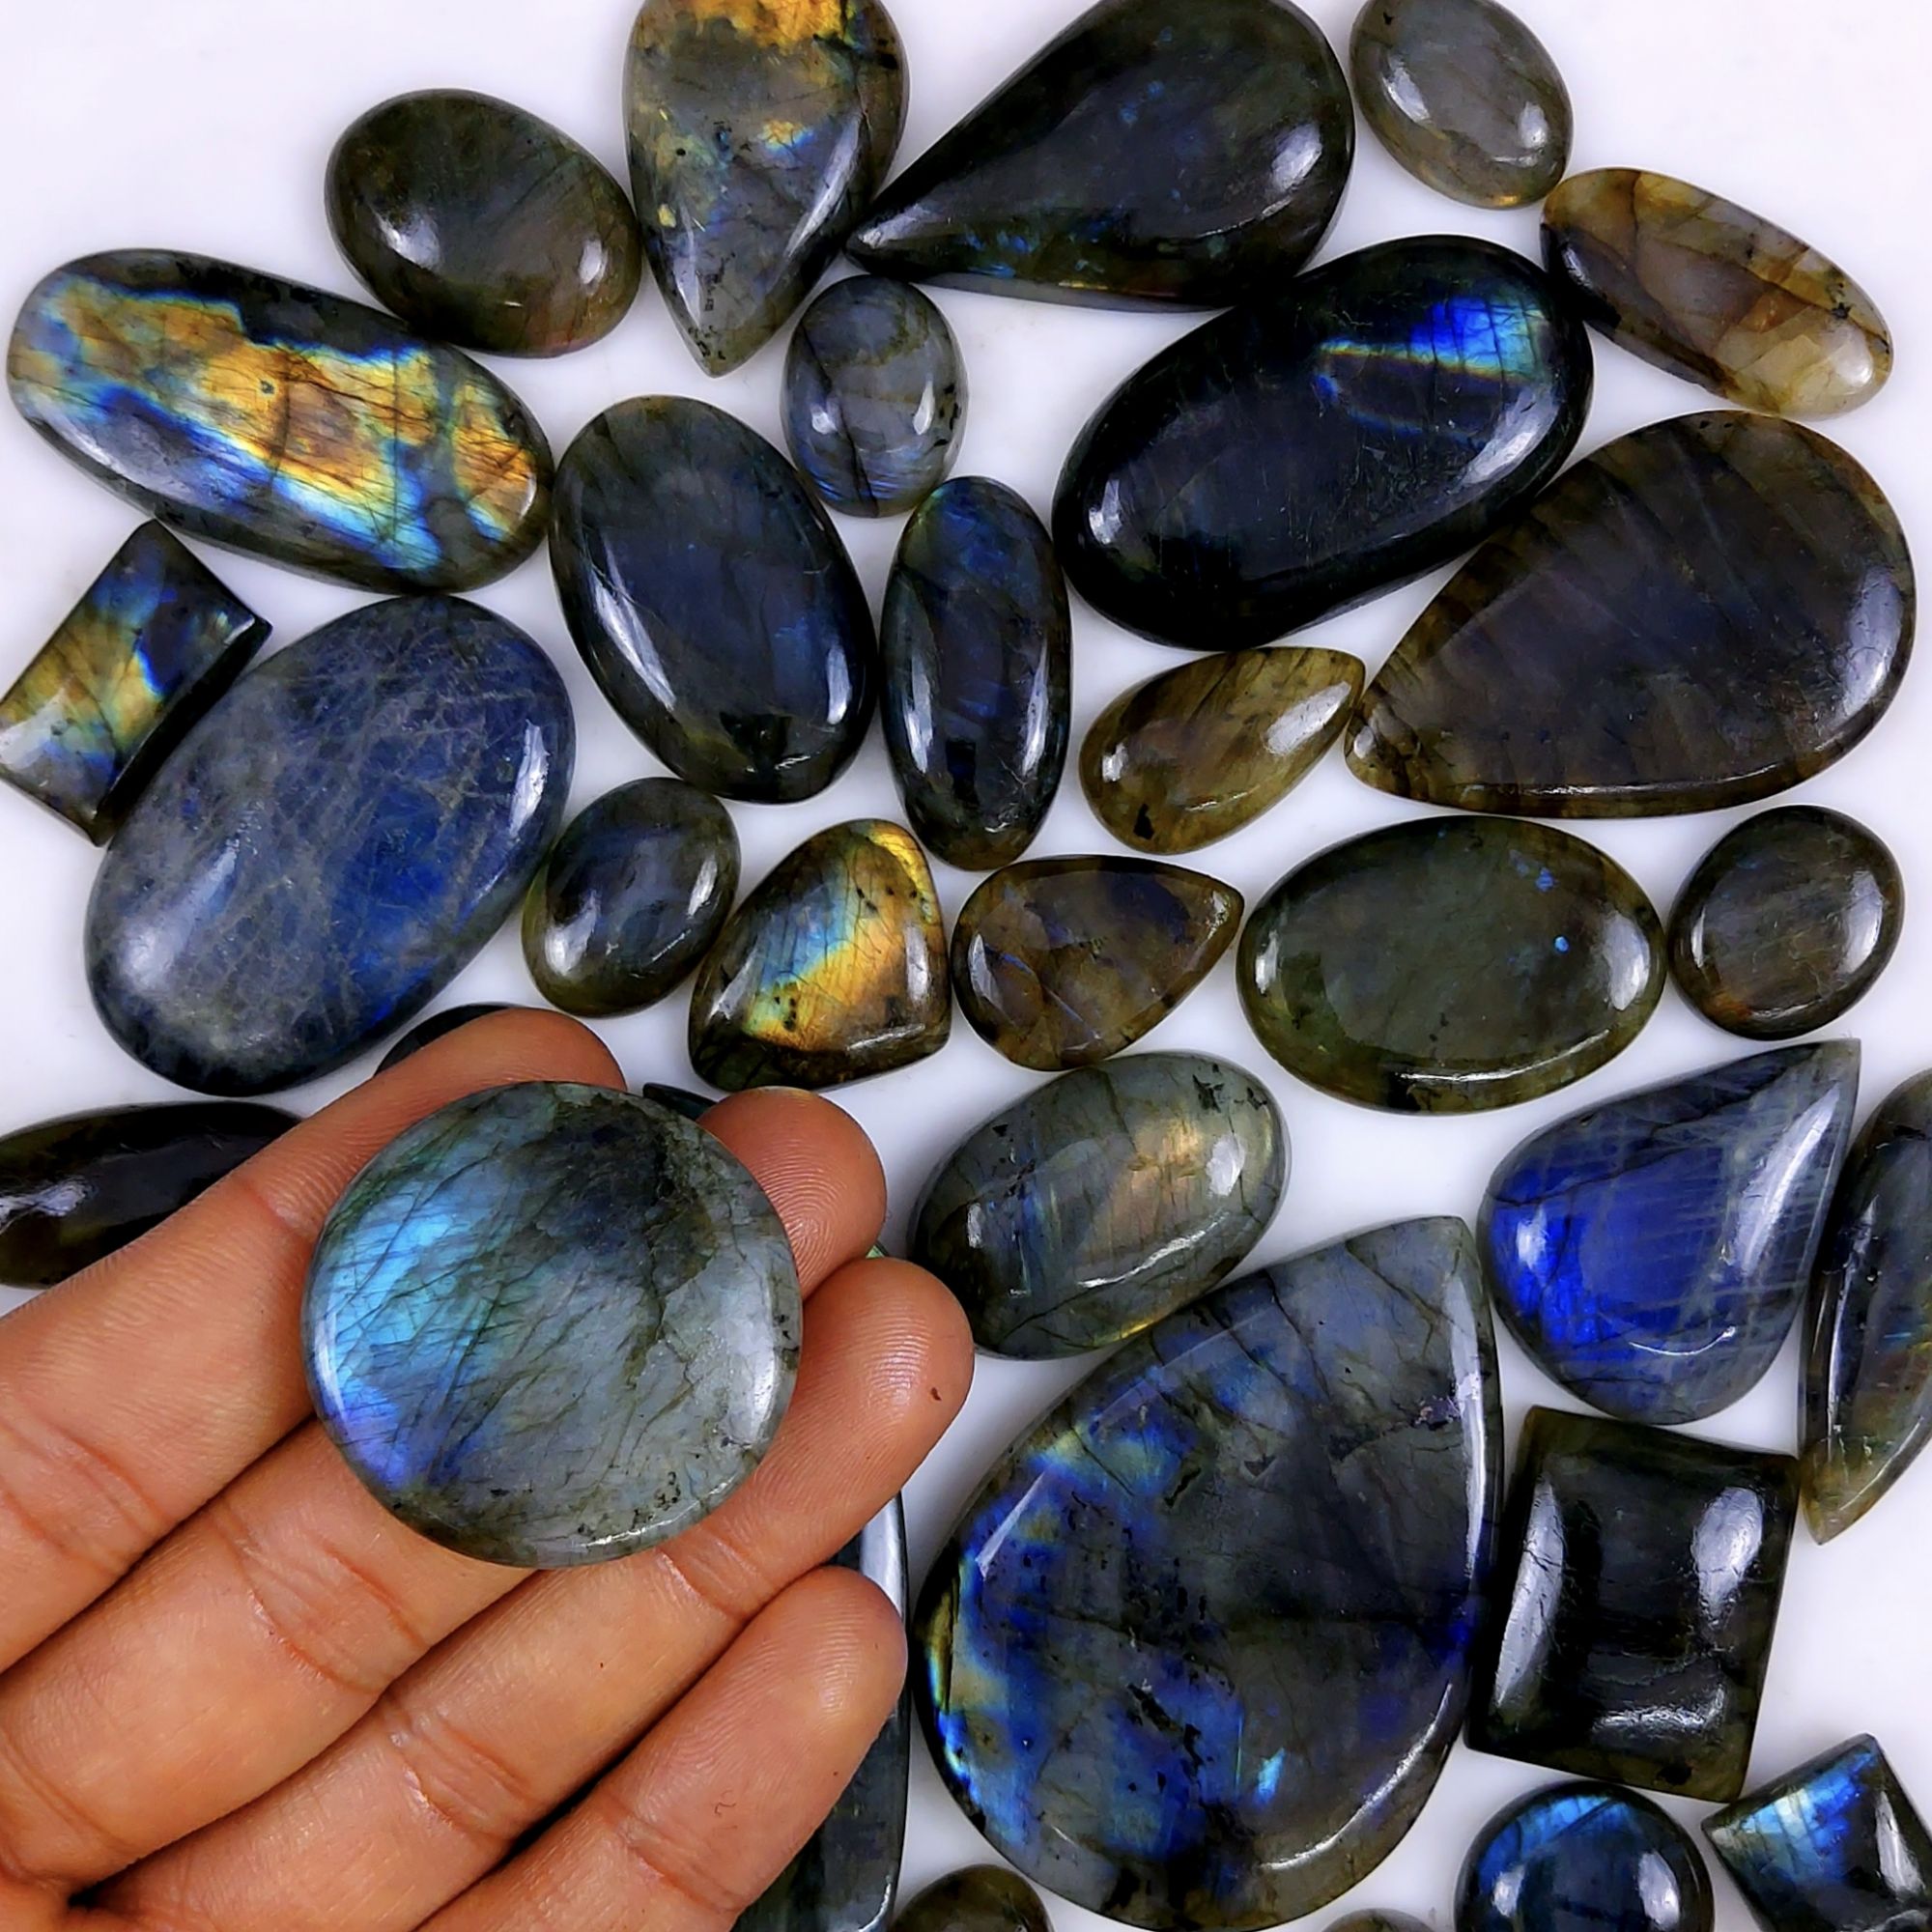 40pc 1540Cts Labradorite Cabochon Multifire Healing Crystal For Jewelry Supplies, Labradorite Necklace Handmade Wire Wrapped Gemstone Pendant 46x26 20x12mm#6394